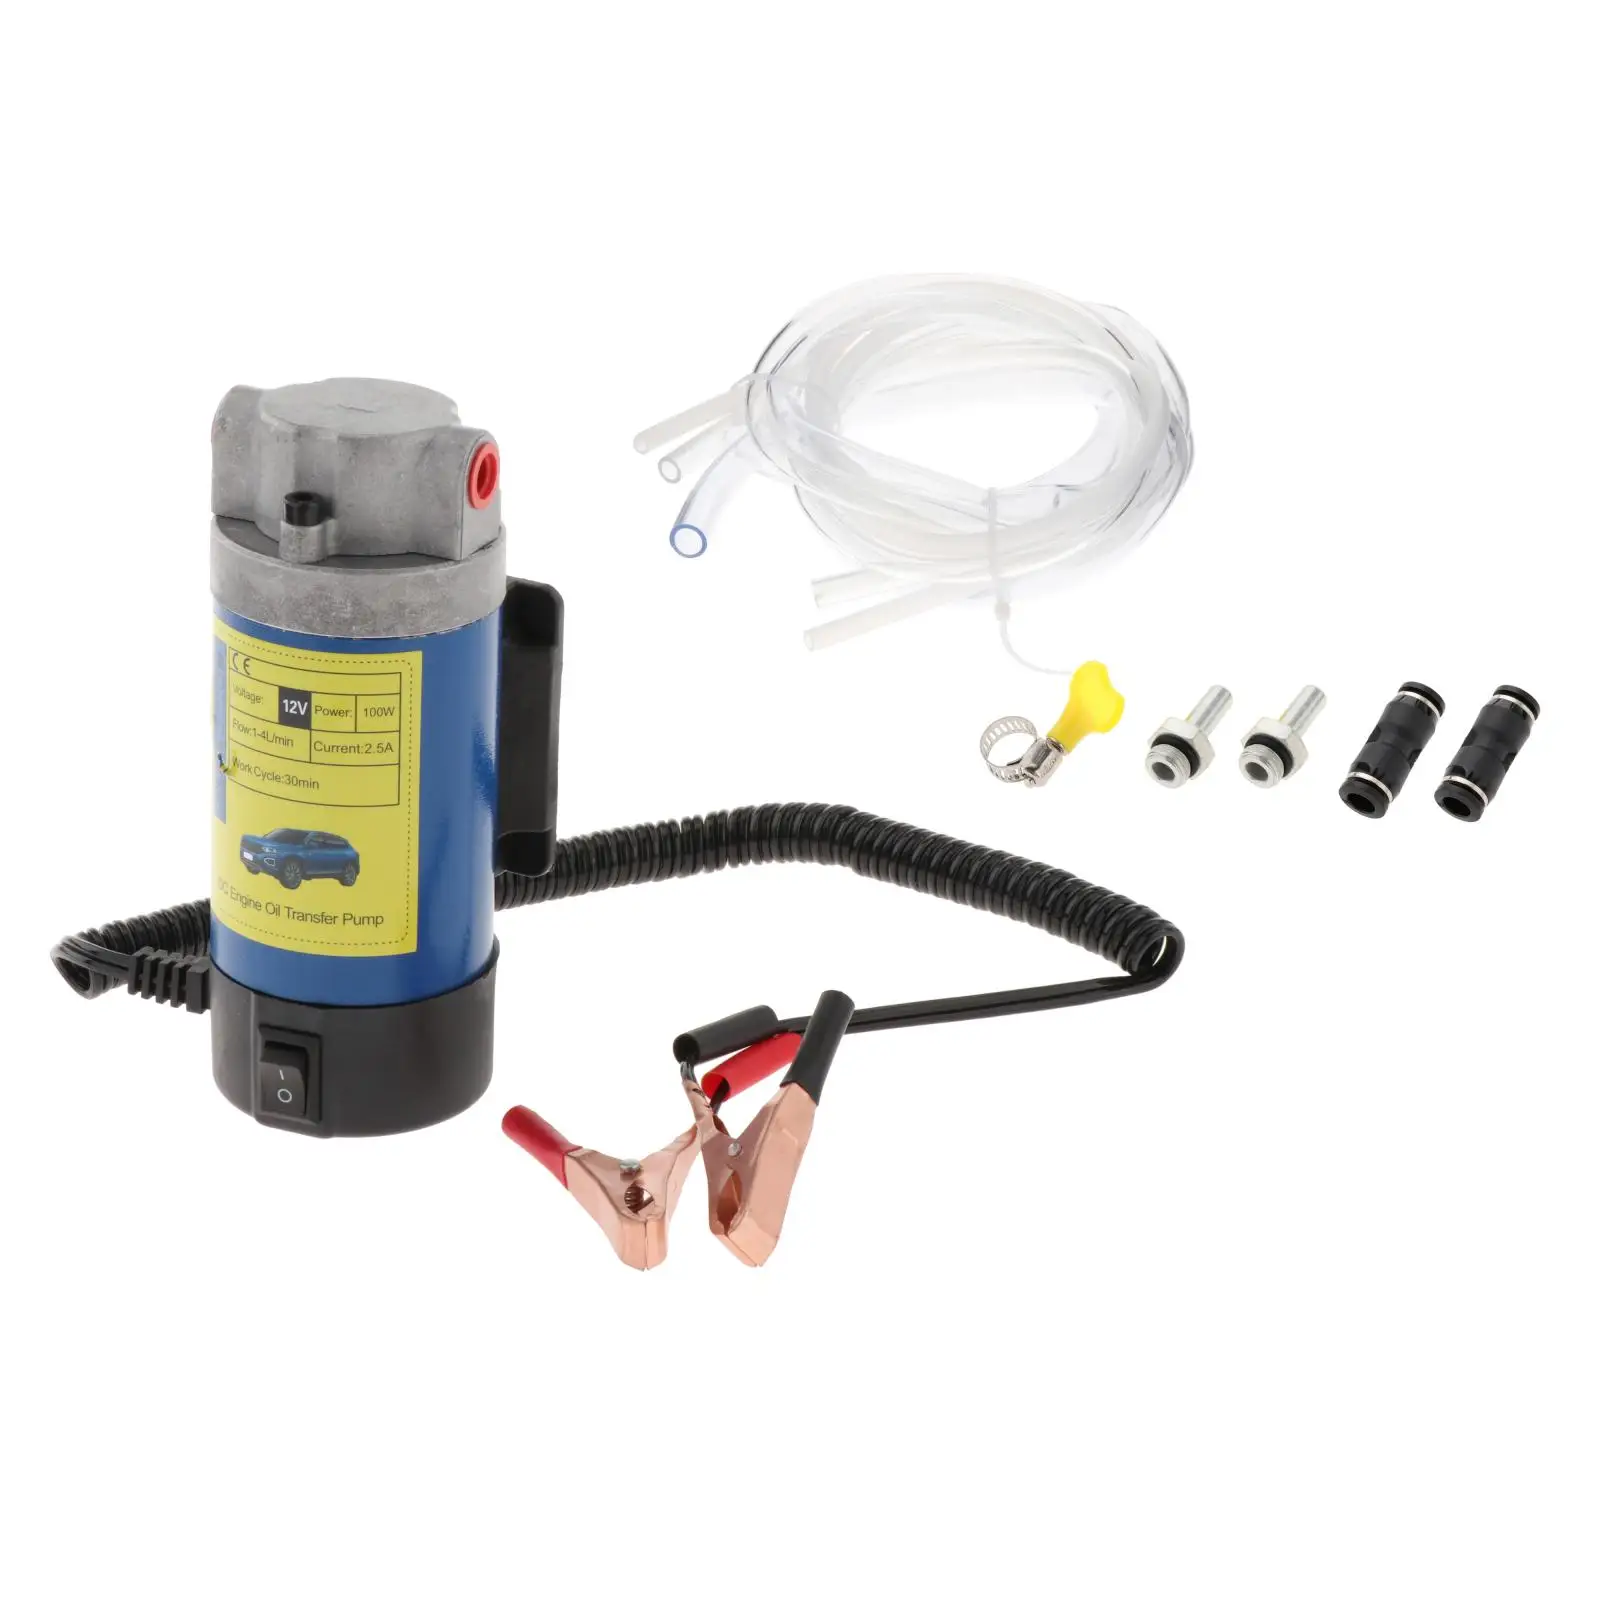 Portable Oil Transfer Suction Pump Pump Oil Suction Electric 100W 12V Oil Change Pump Extractor Fits for Motorbike Adults Men